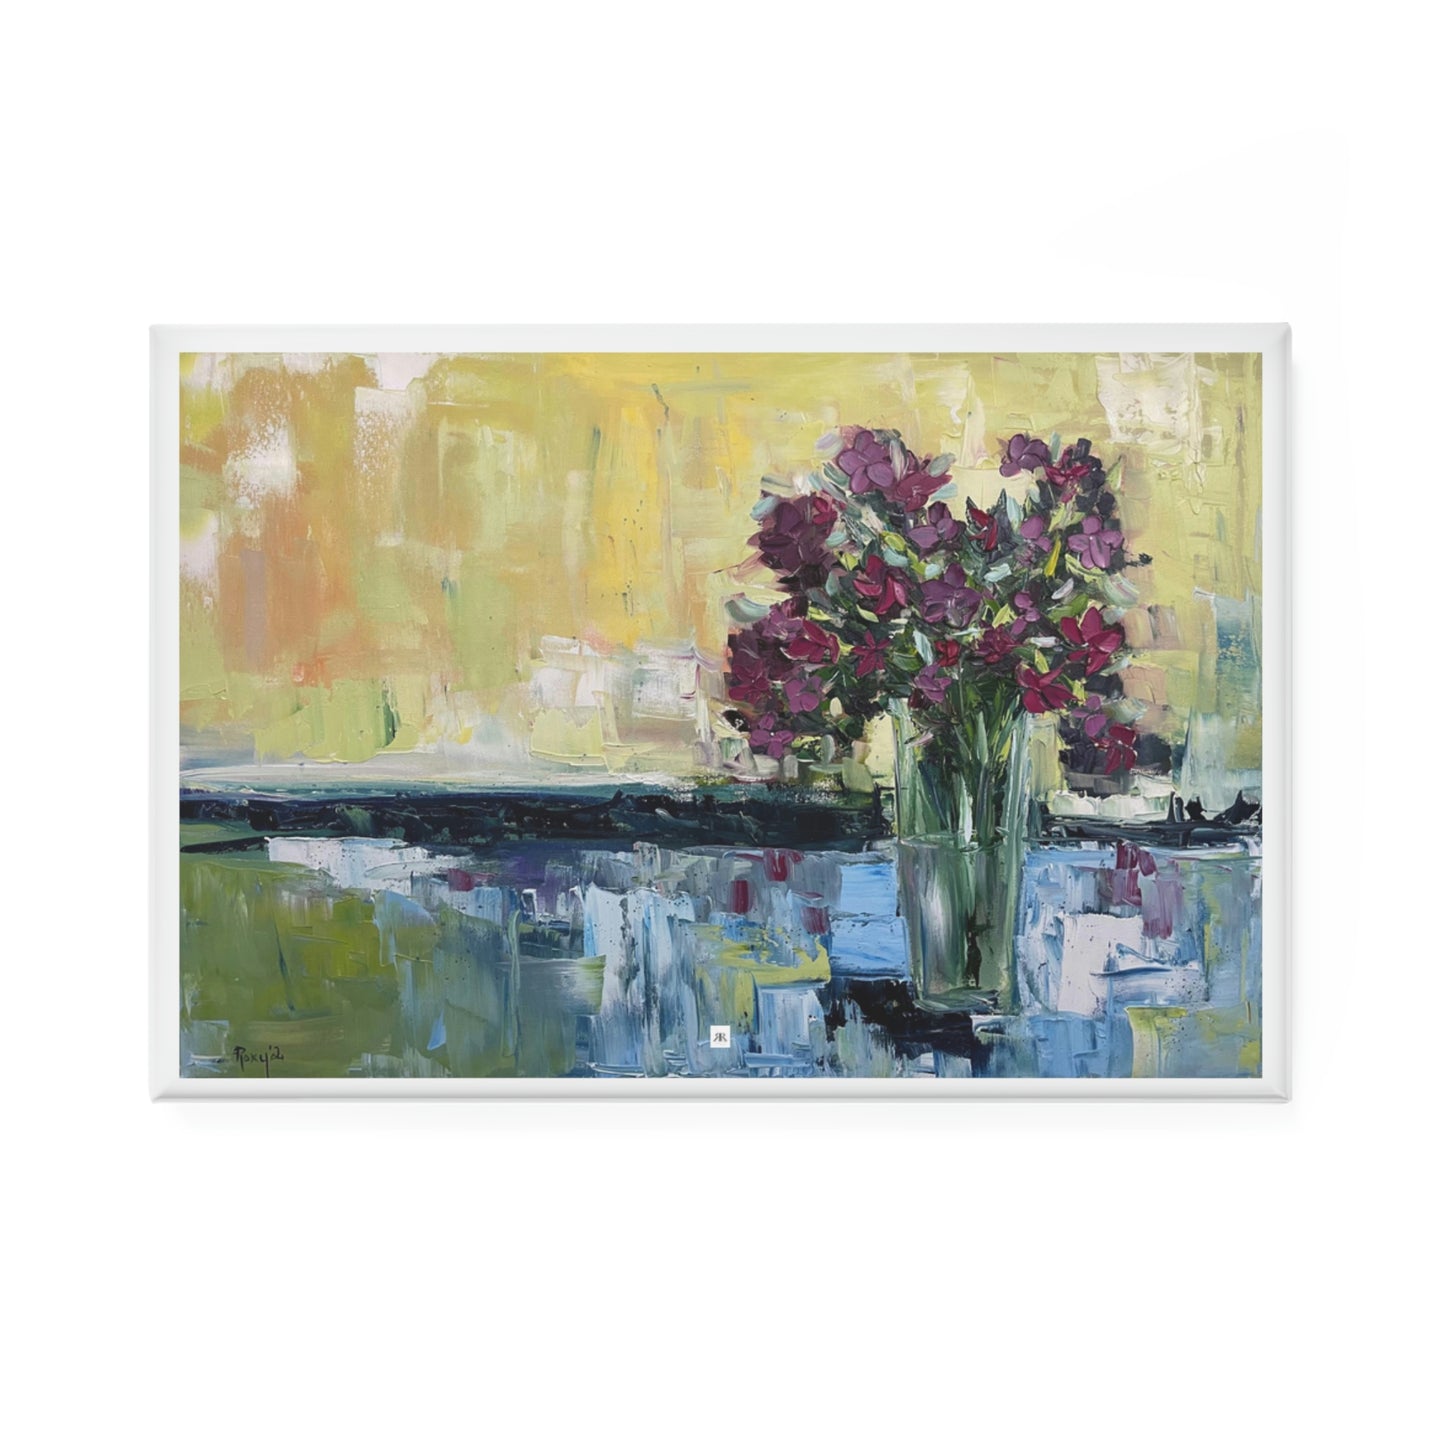 Aimant bouton Shabby Wildflowers, rectangulaire